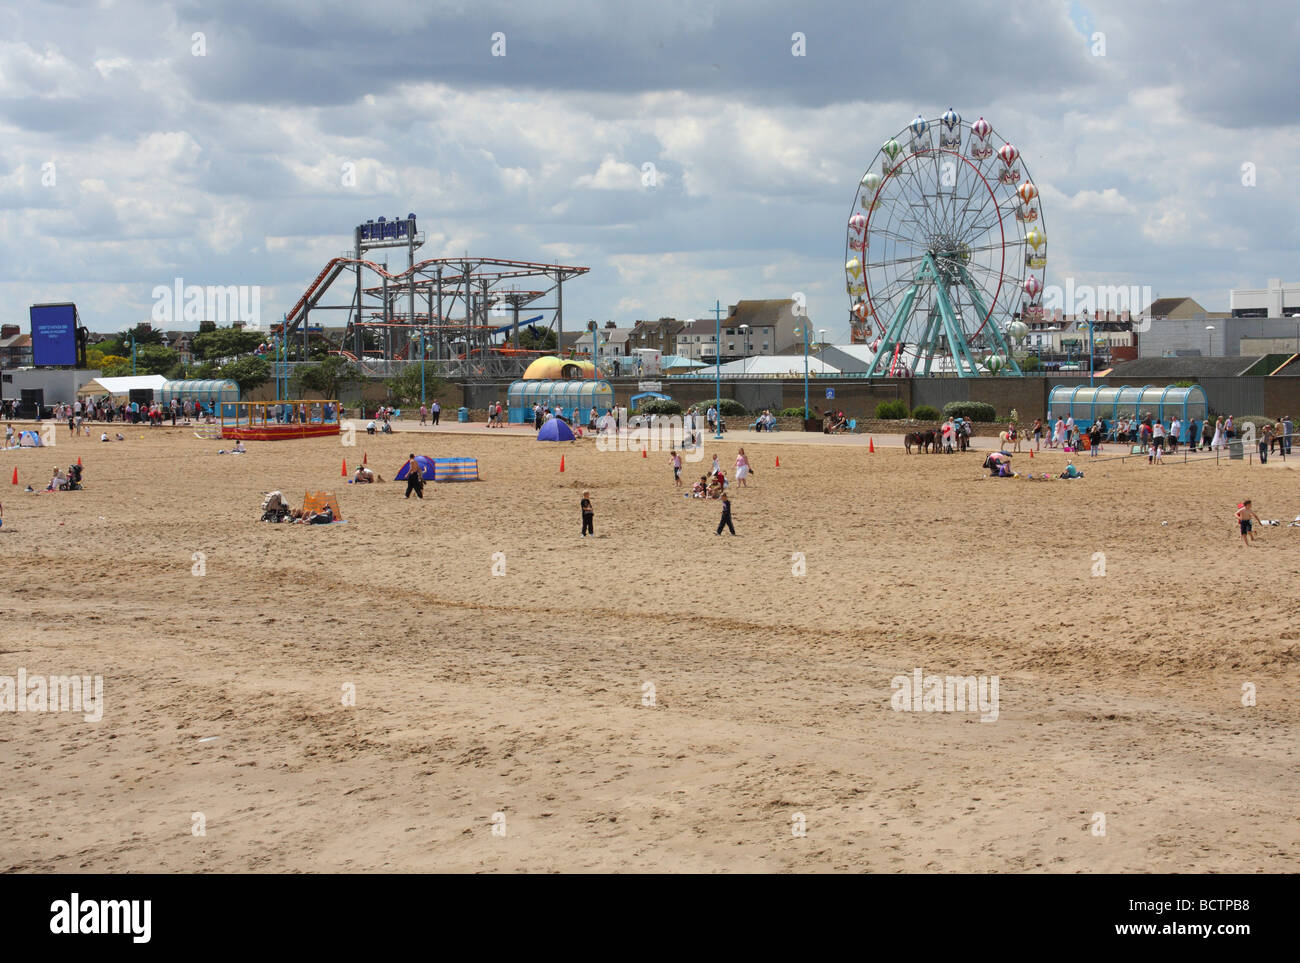 The beach and funfair at Skegness, Lincolnshire, England, U.K. Stock Photo